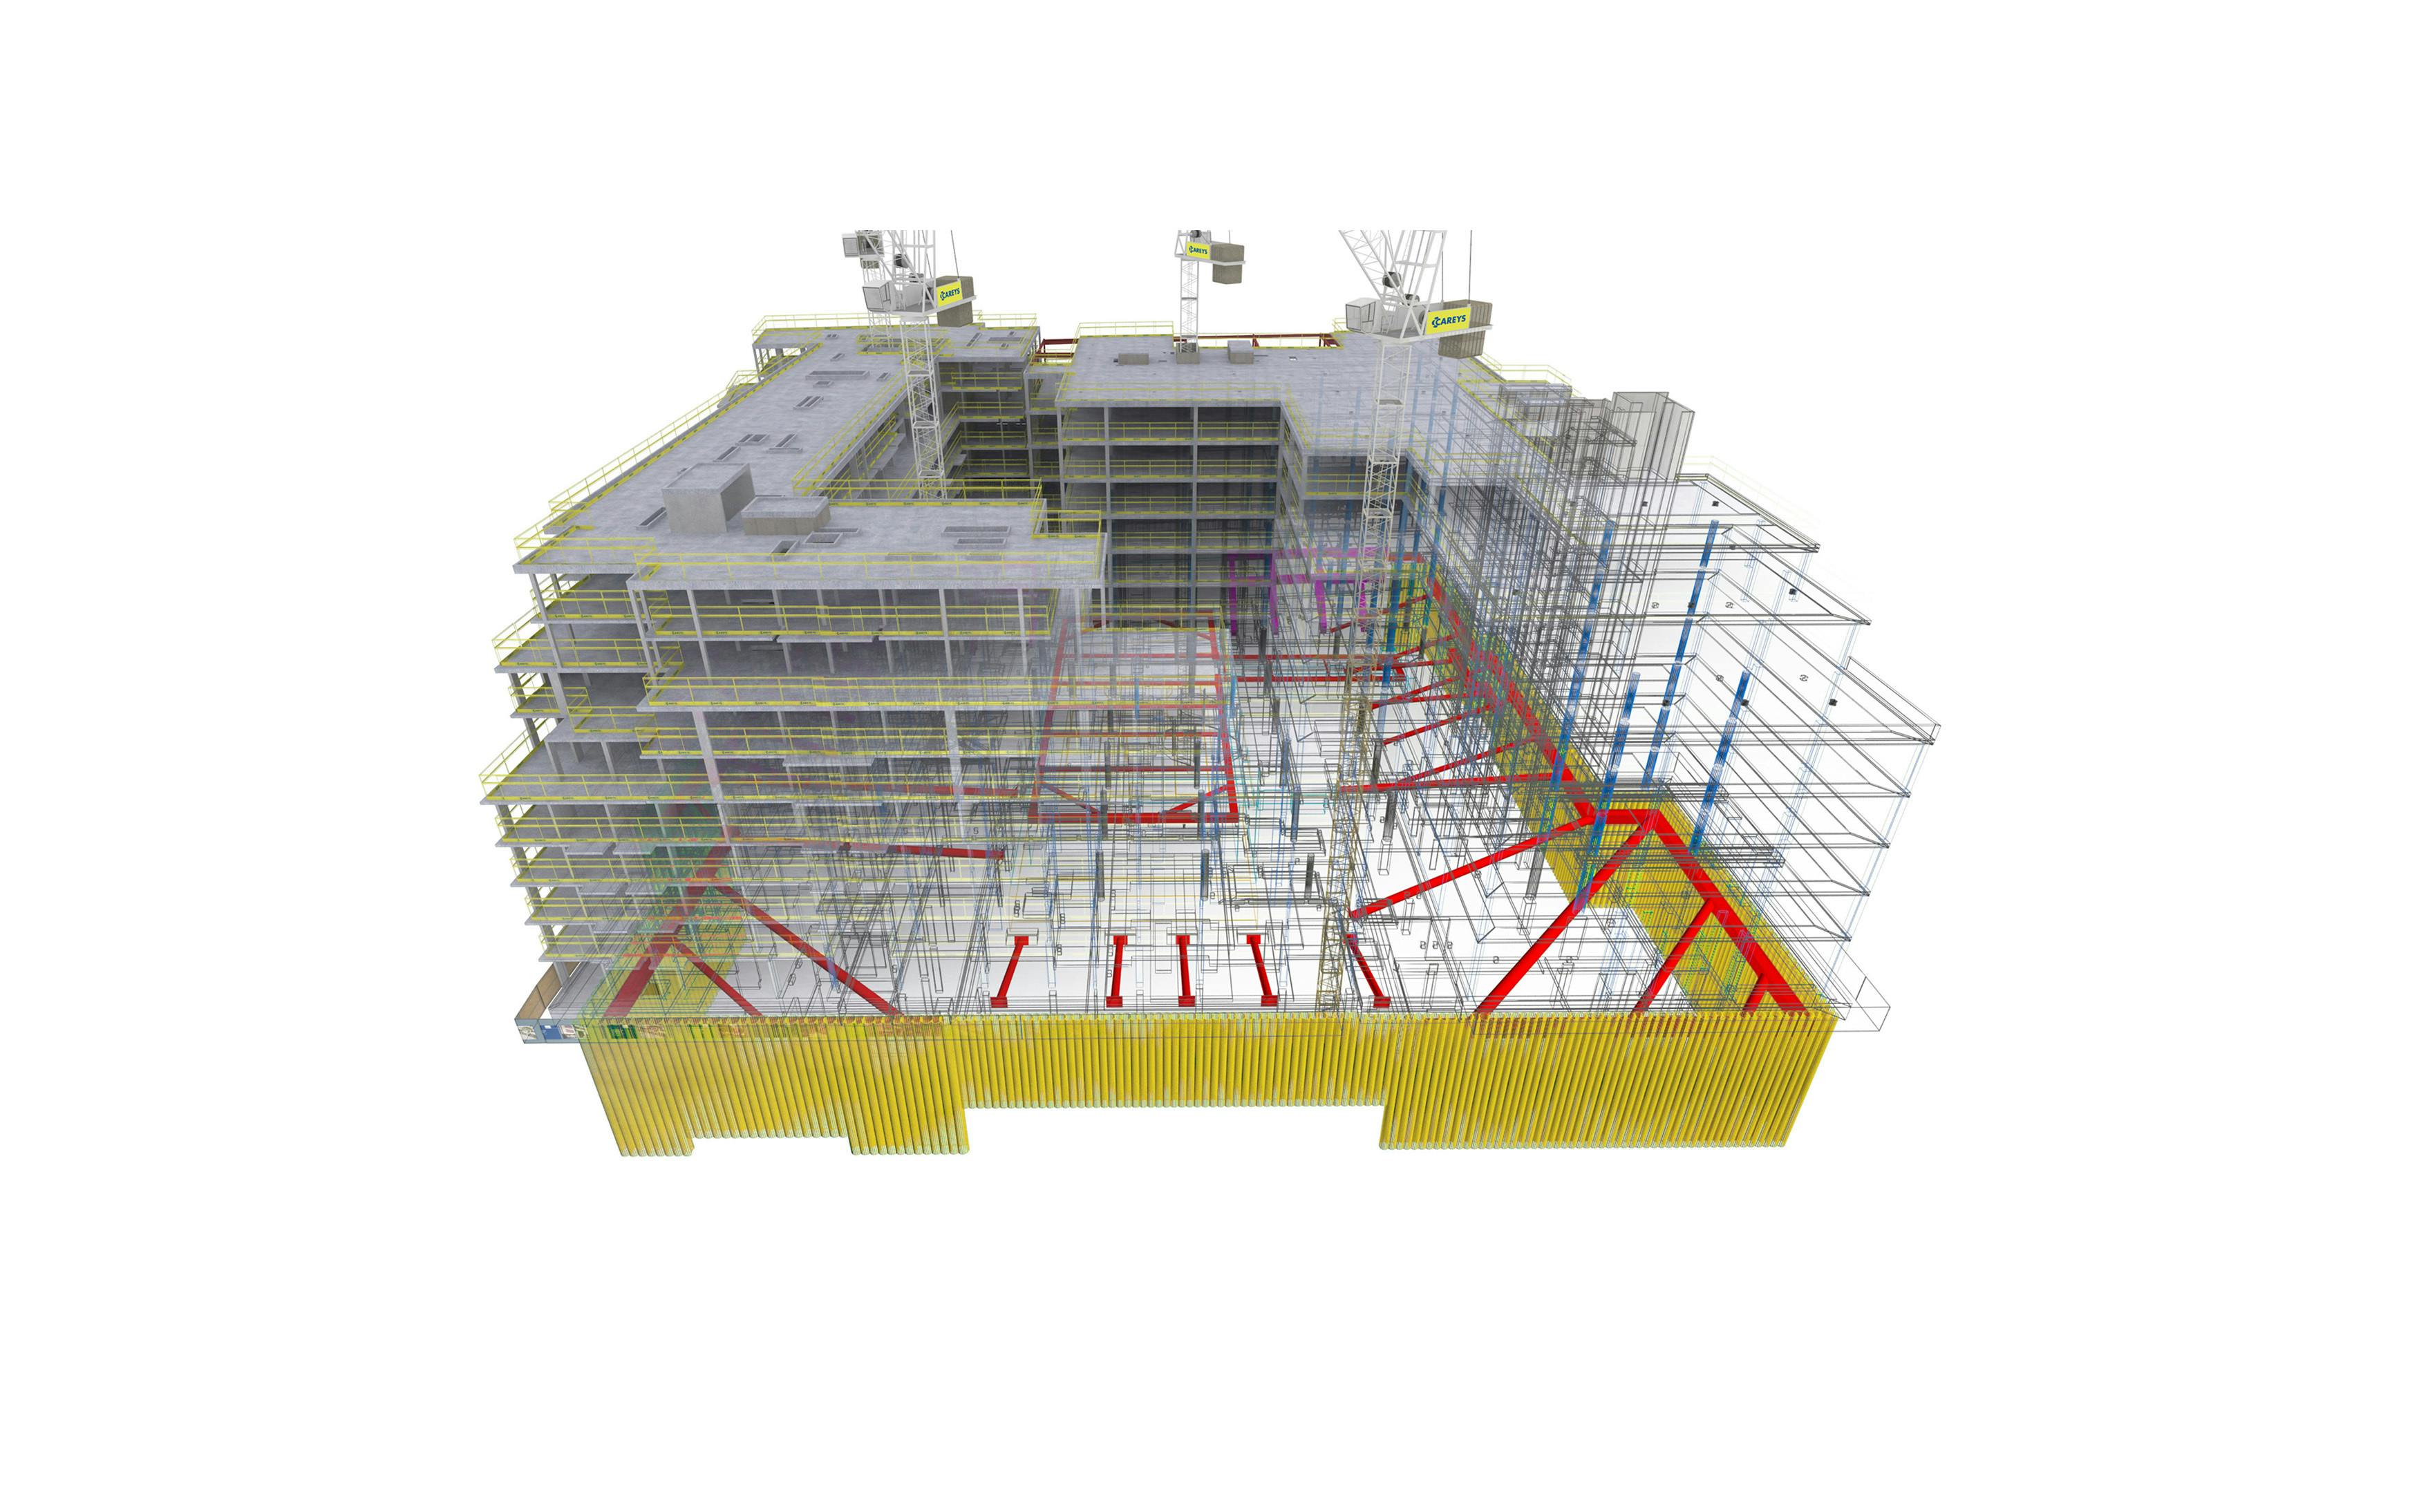 Development of design, digital and construction engineering solutions